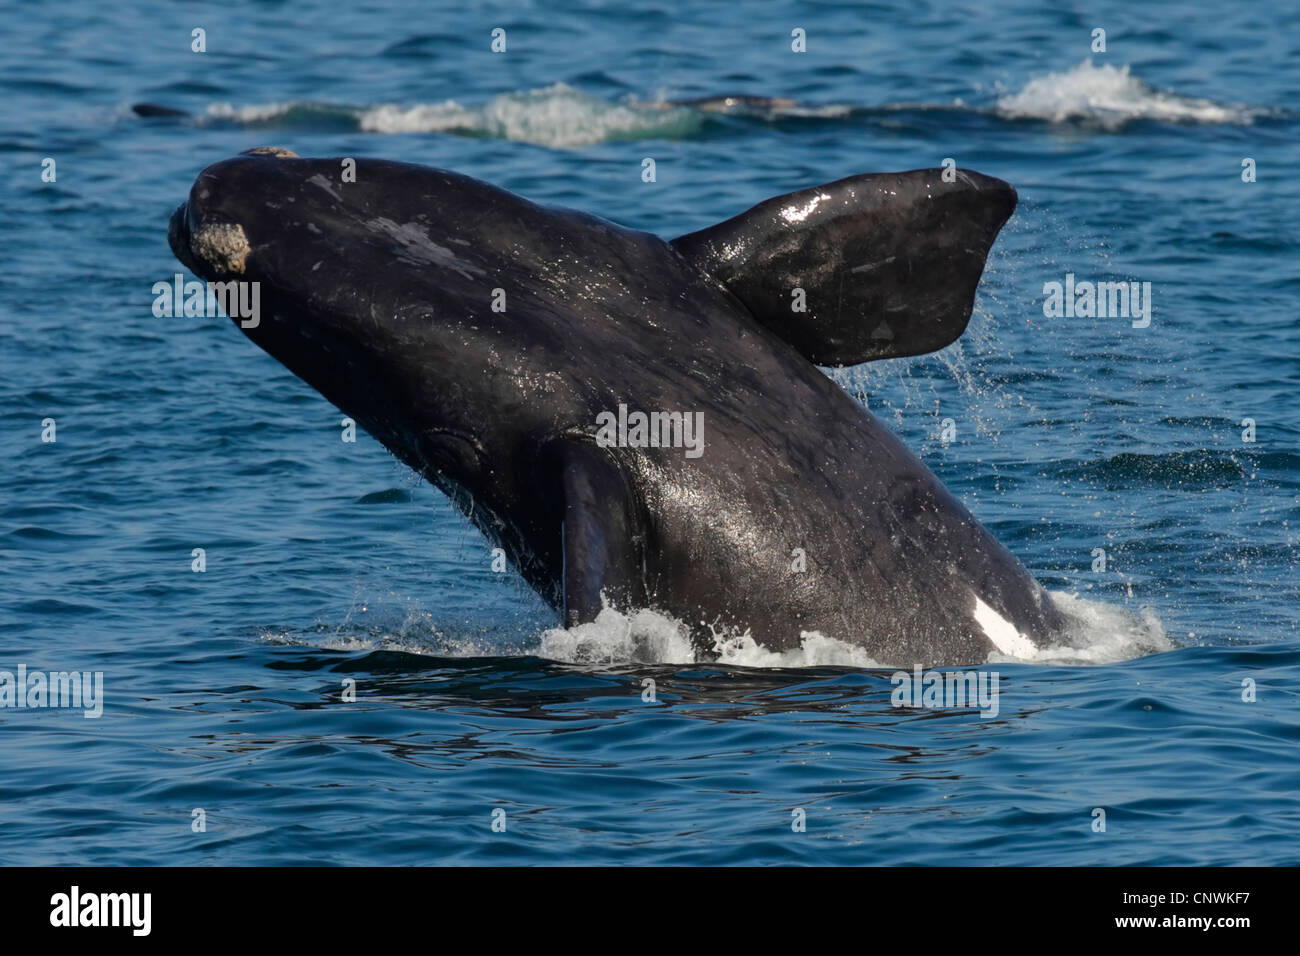 southern right whale (Eubalaena australis, Balaena glacialis australis), jumping out of the water, South Africa, Western Cape Stock Photo